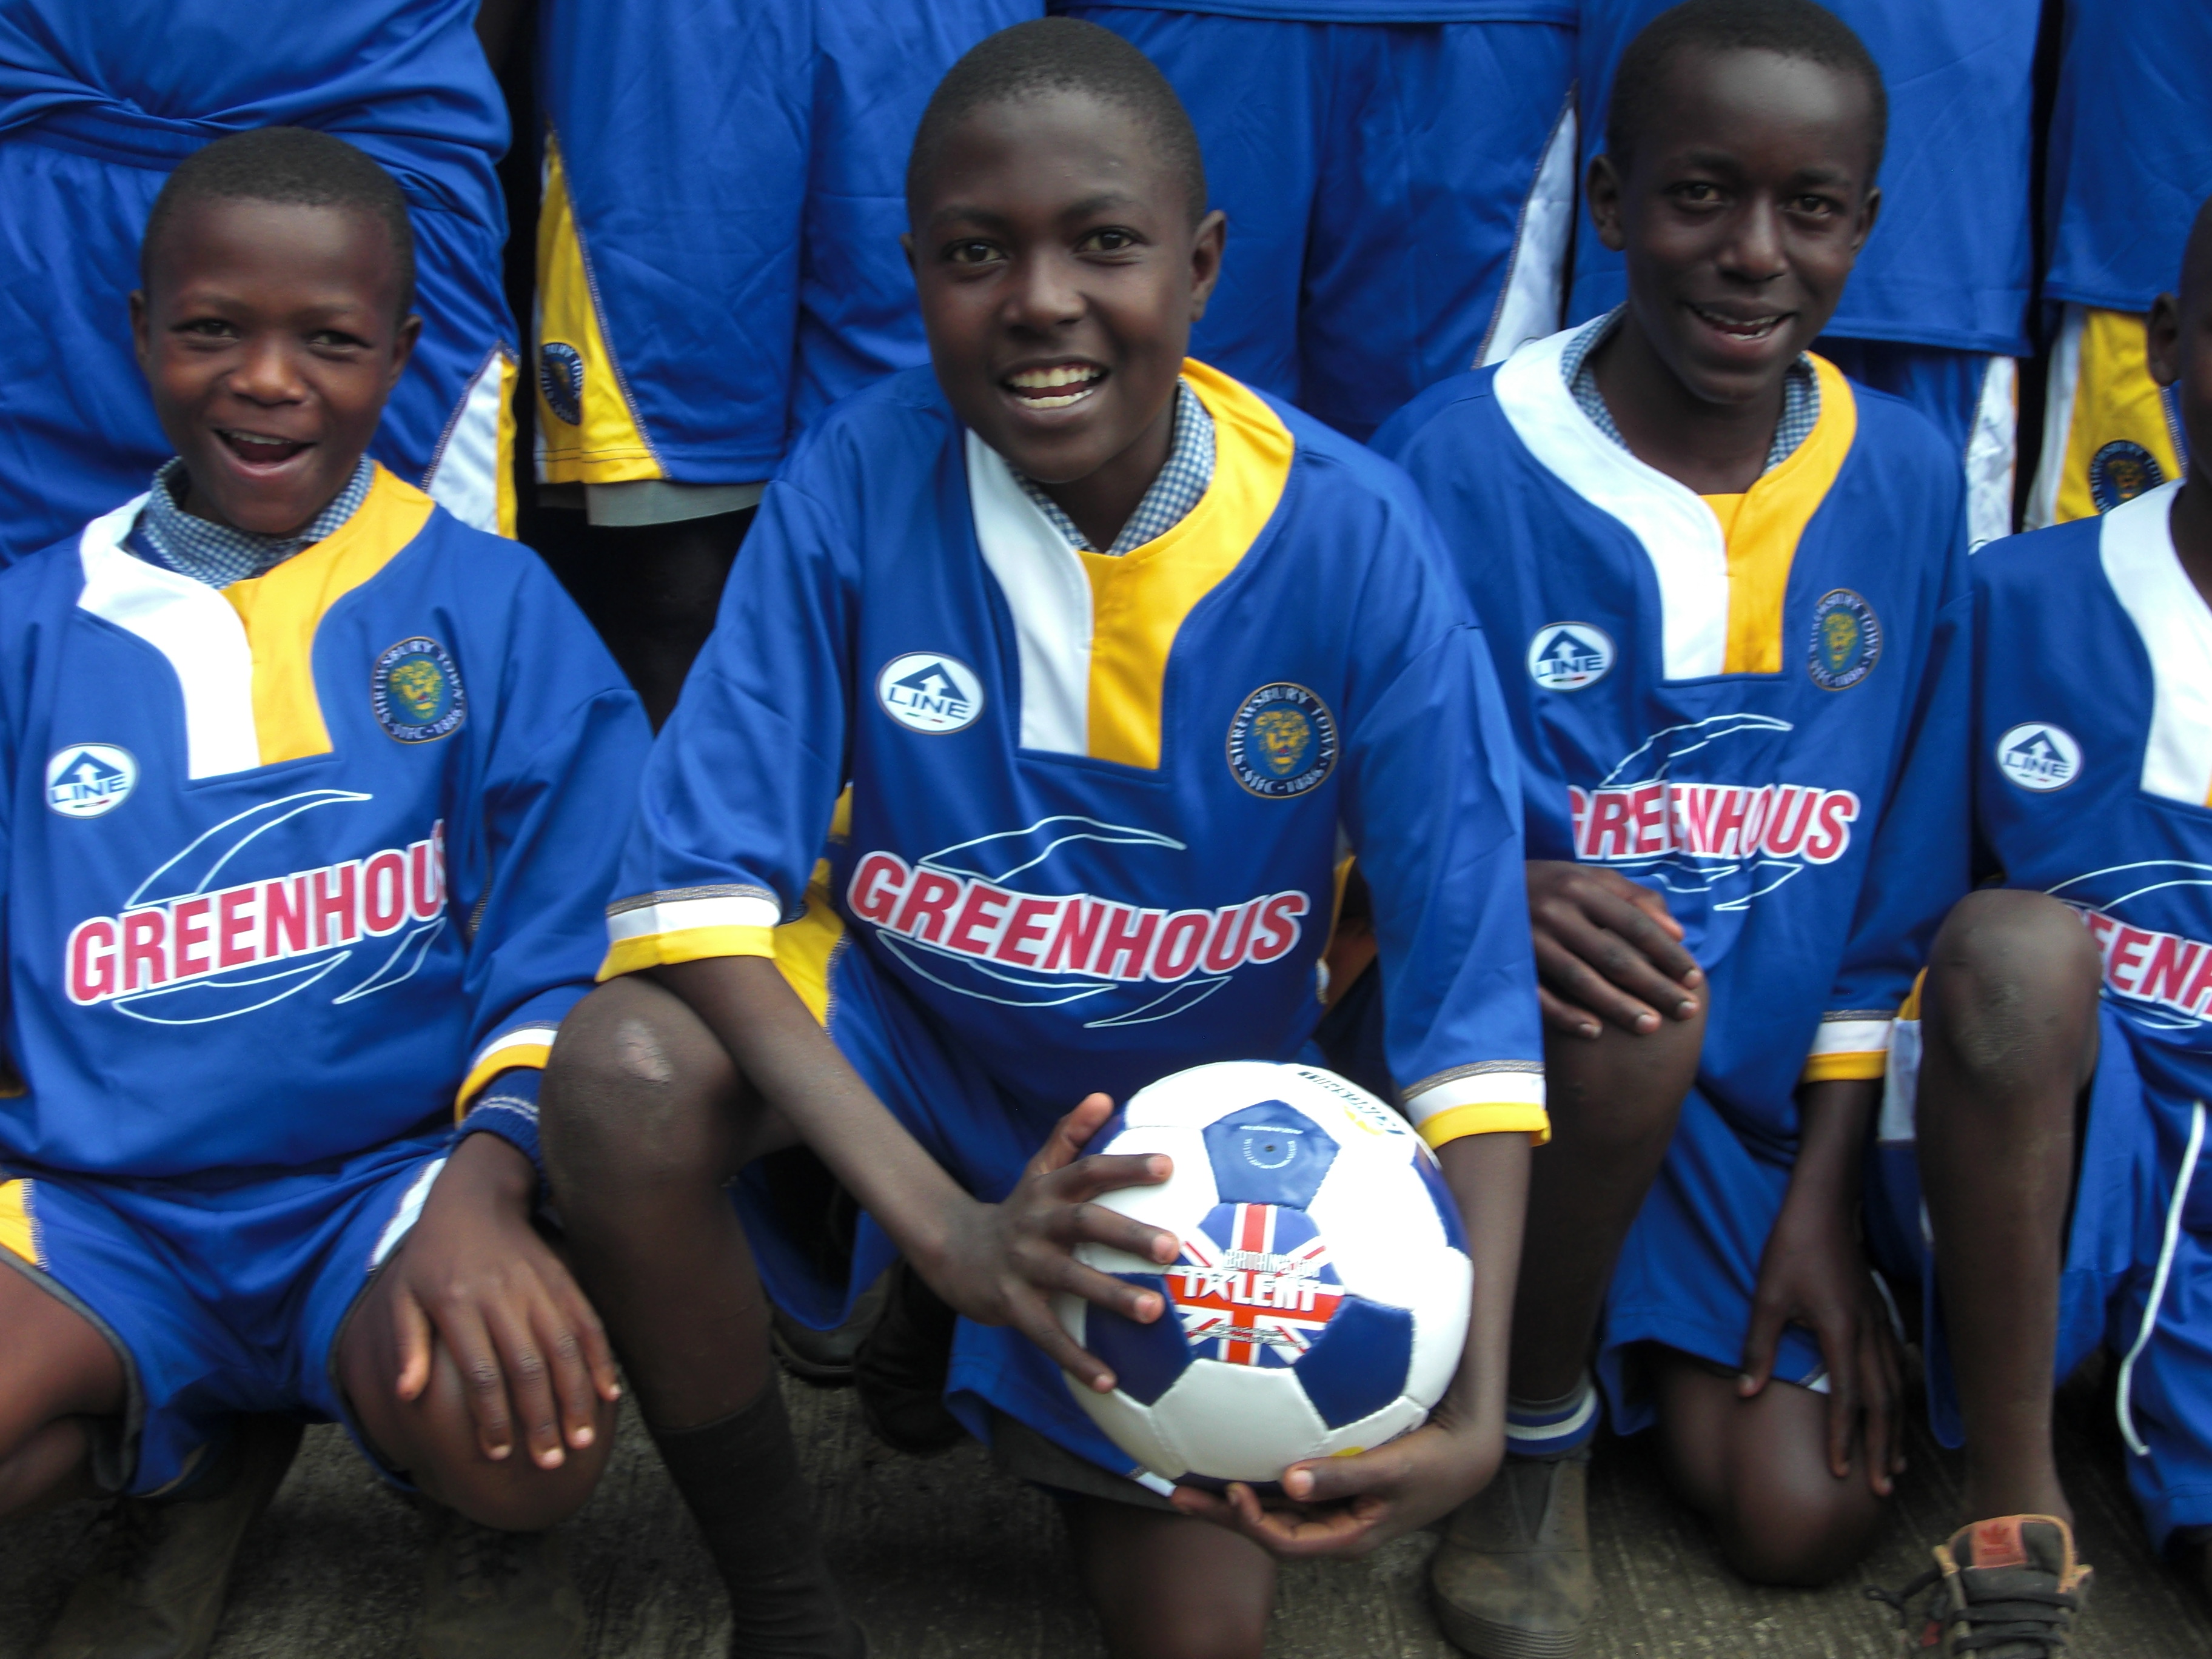 Children and young people wearing Shrewsbury Town Football Club kit.